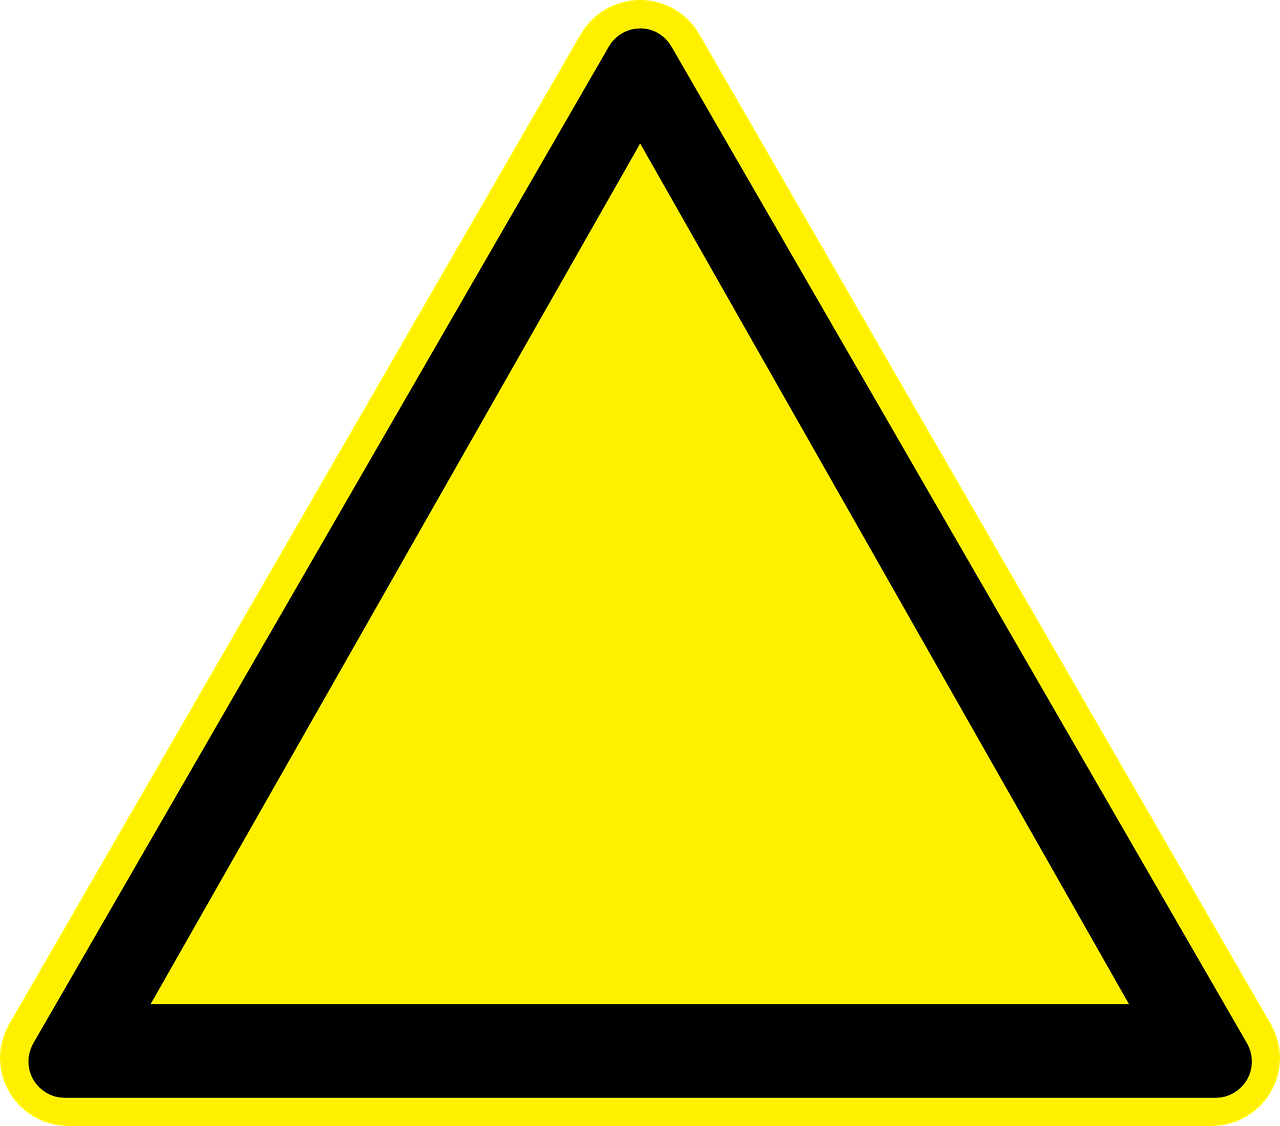 What is a yellow sign with a black triangle? 